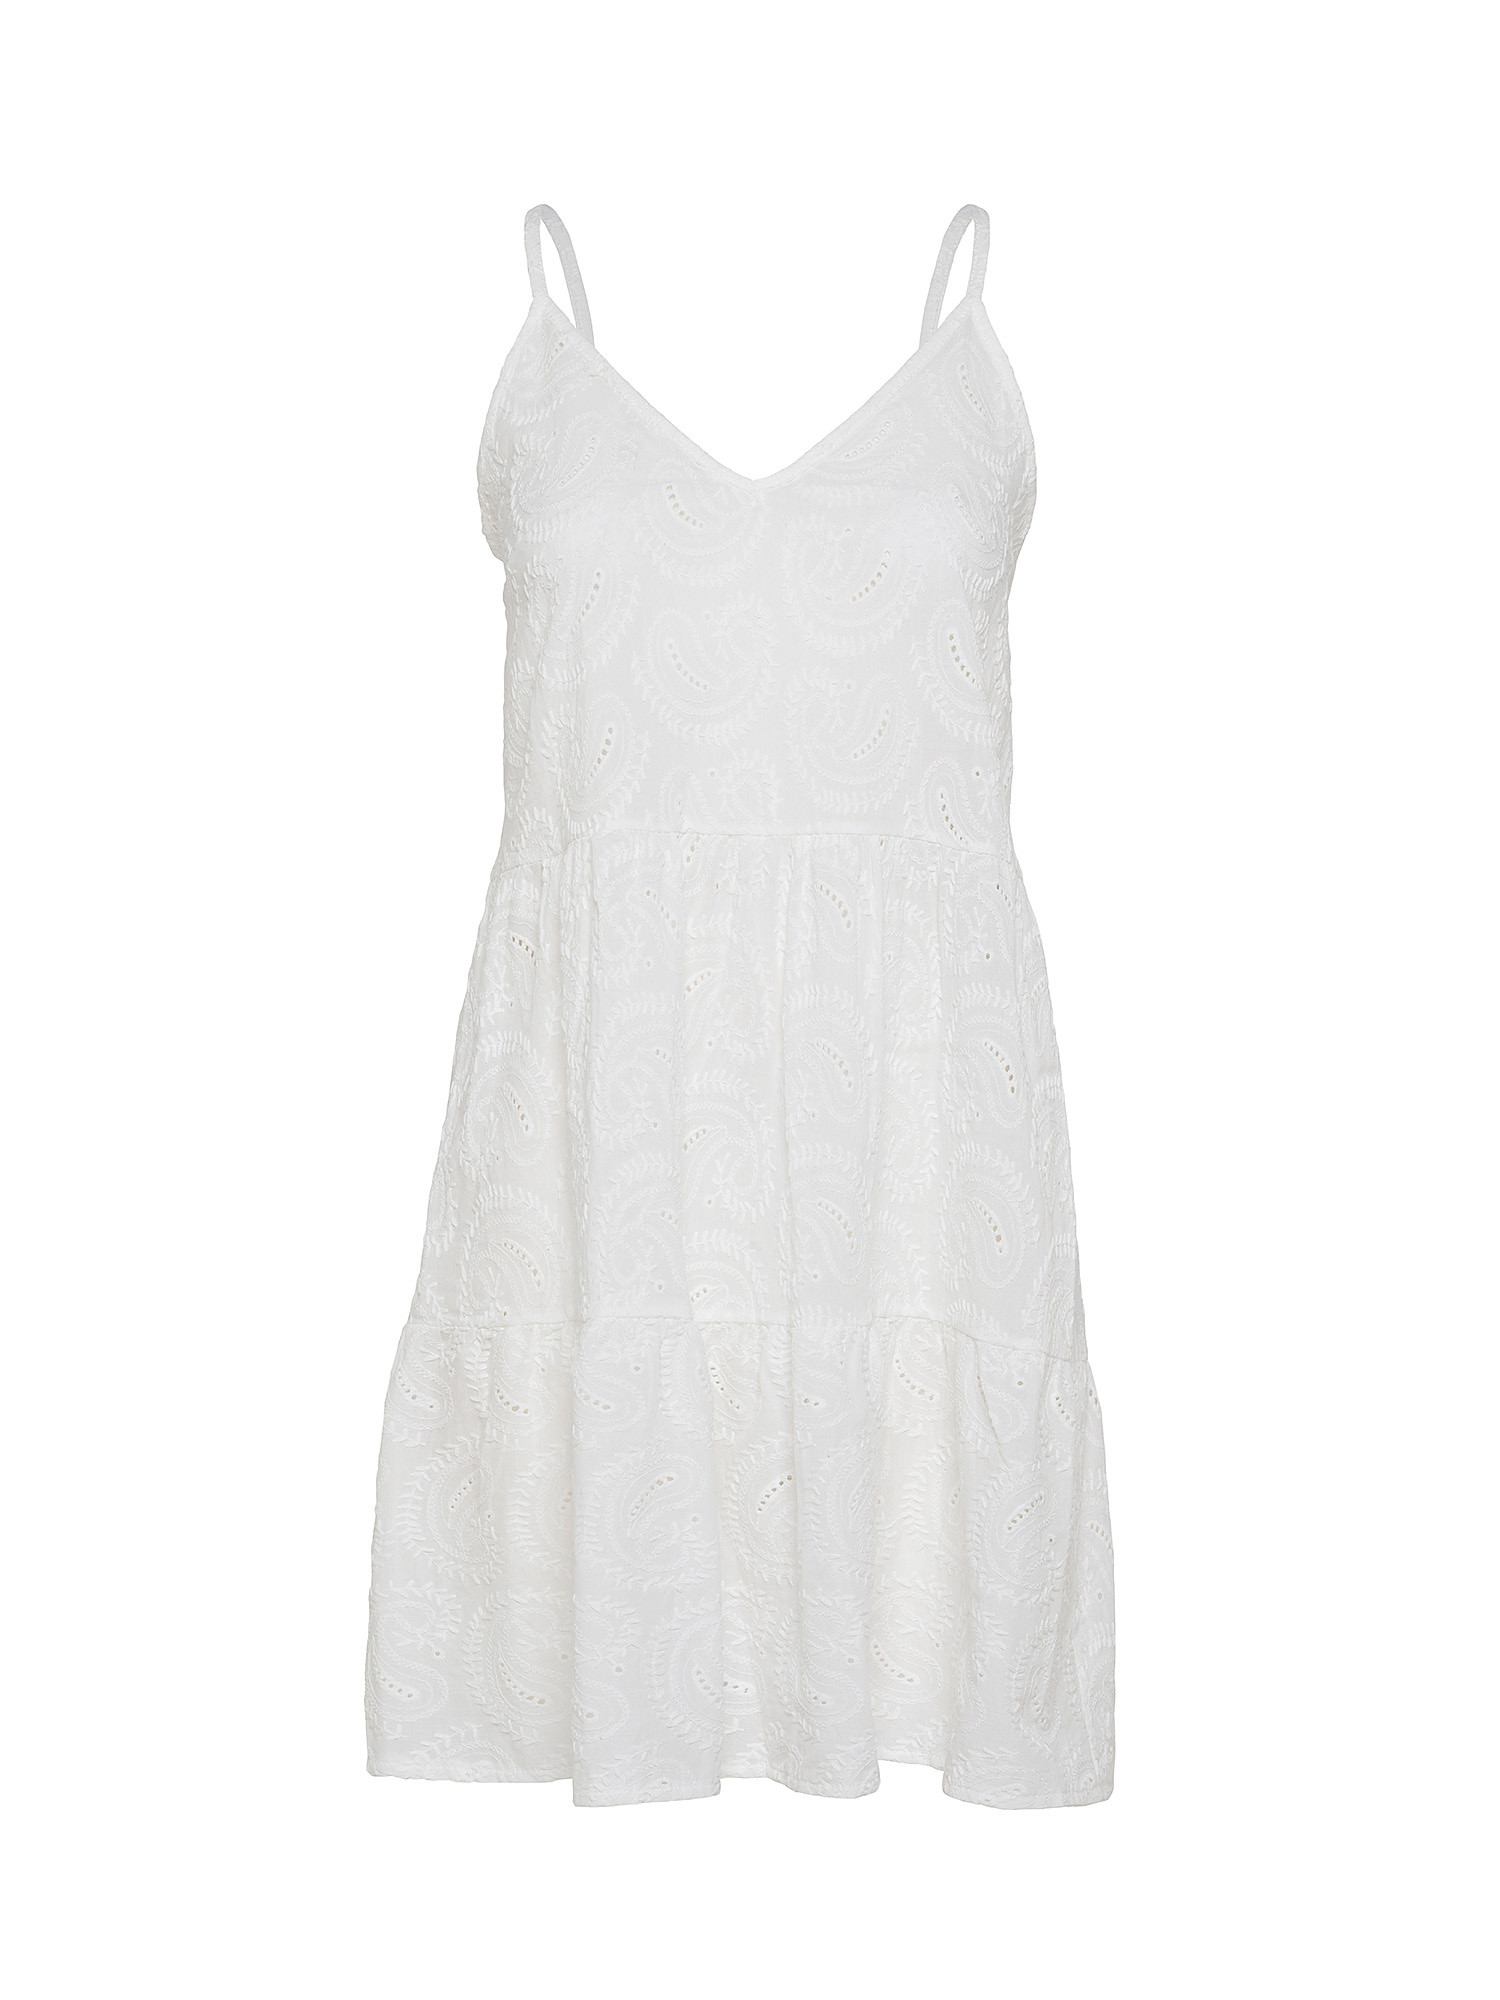 Solid color sangallo dress in cotton, White, large image number 0